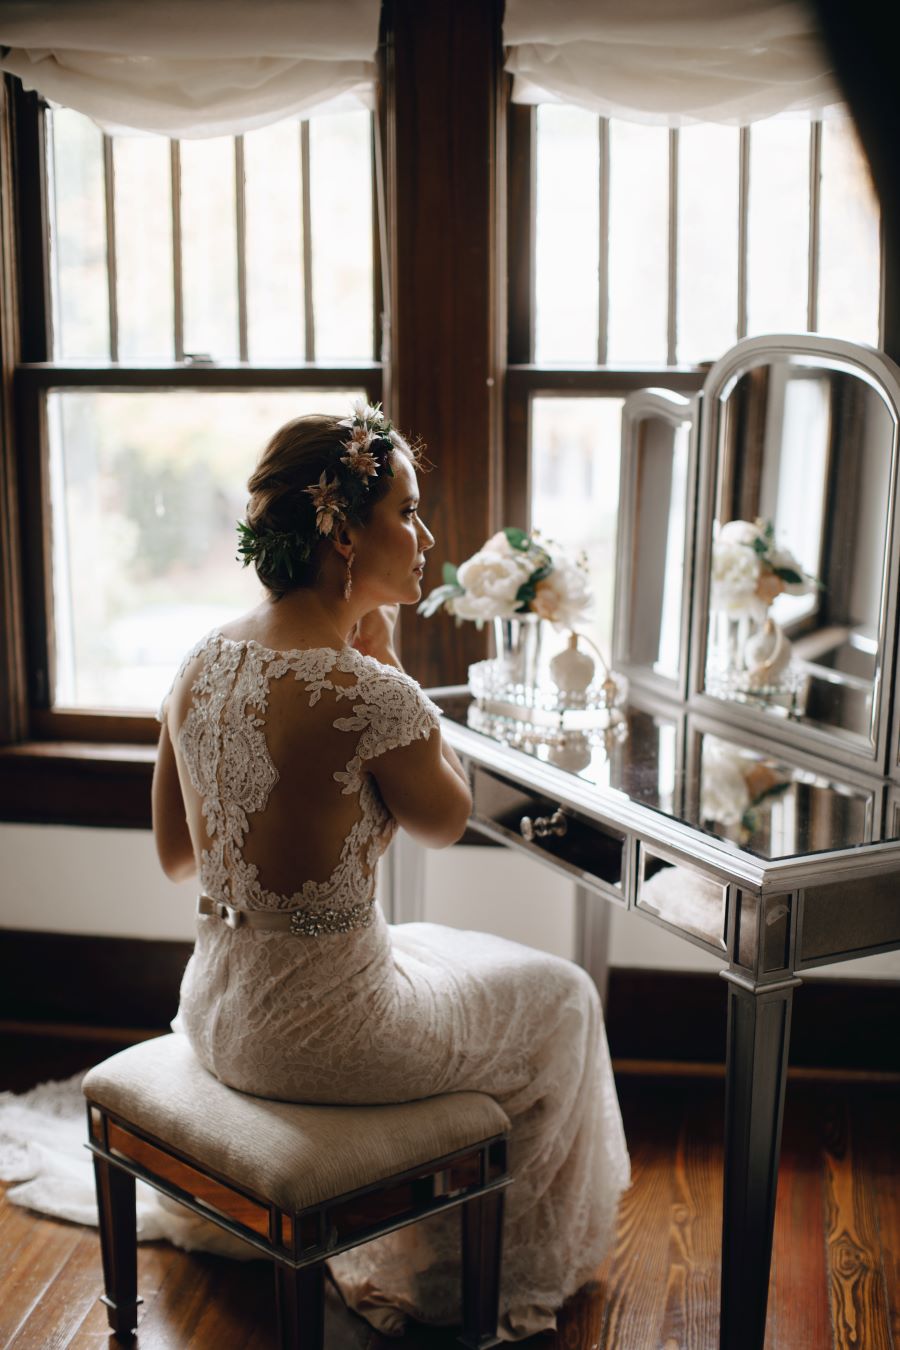 Bride sitting at vanity getting ready for her garden cermony / earthy / fall / October / burgundy